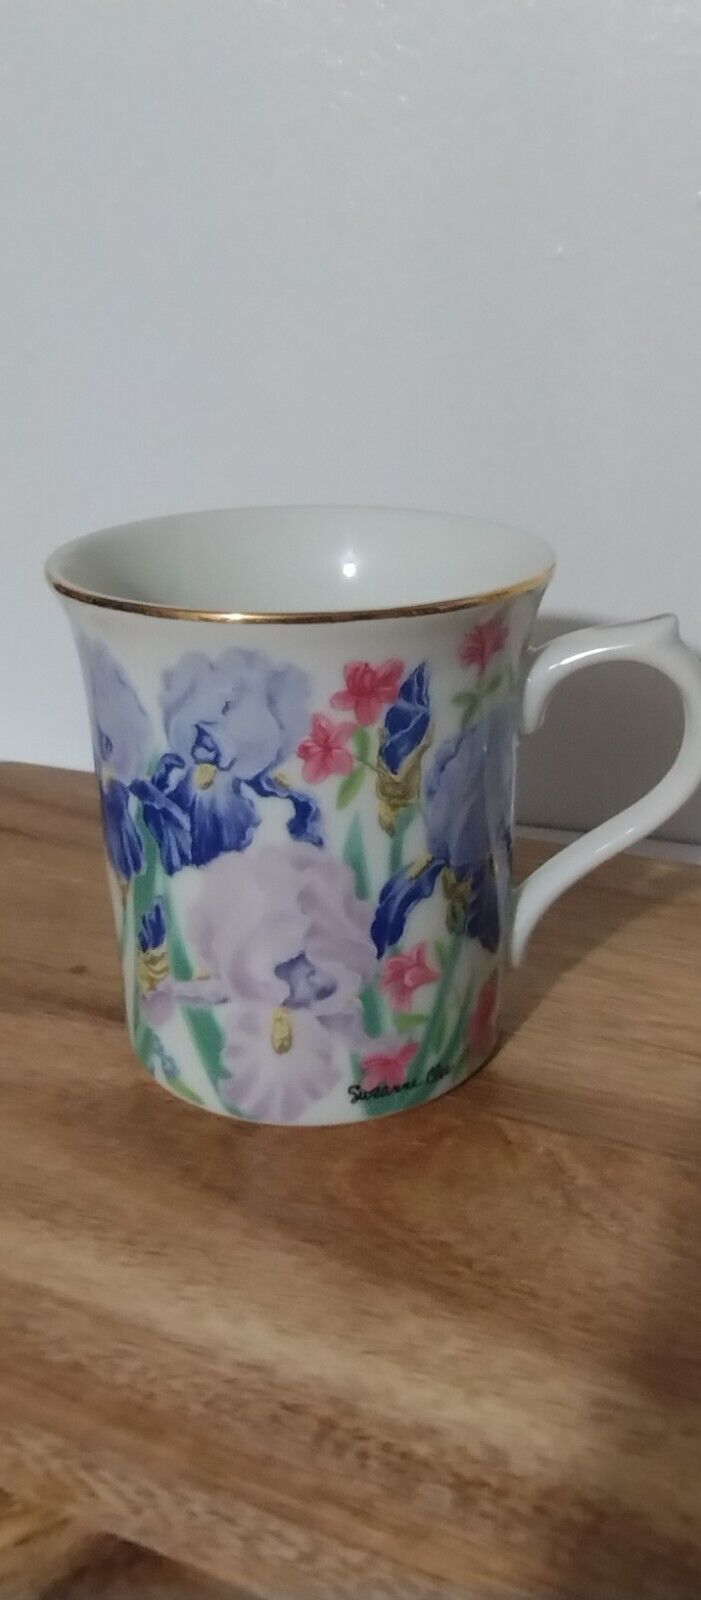 VINTAGE 1995 COFFEE MUG - FLOWER BLOSSOM - SUZANNE CLEE COLLECTION